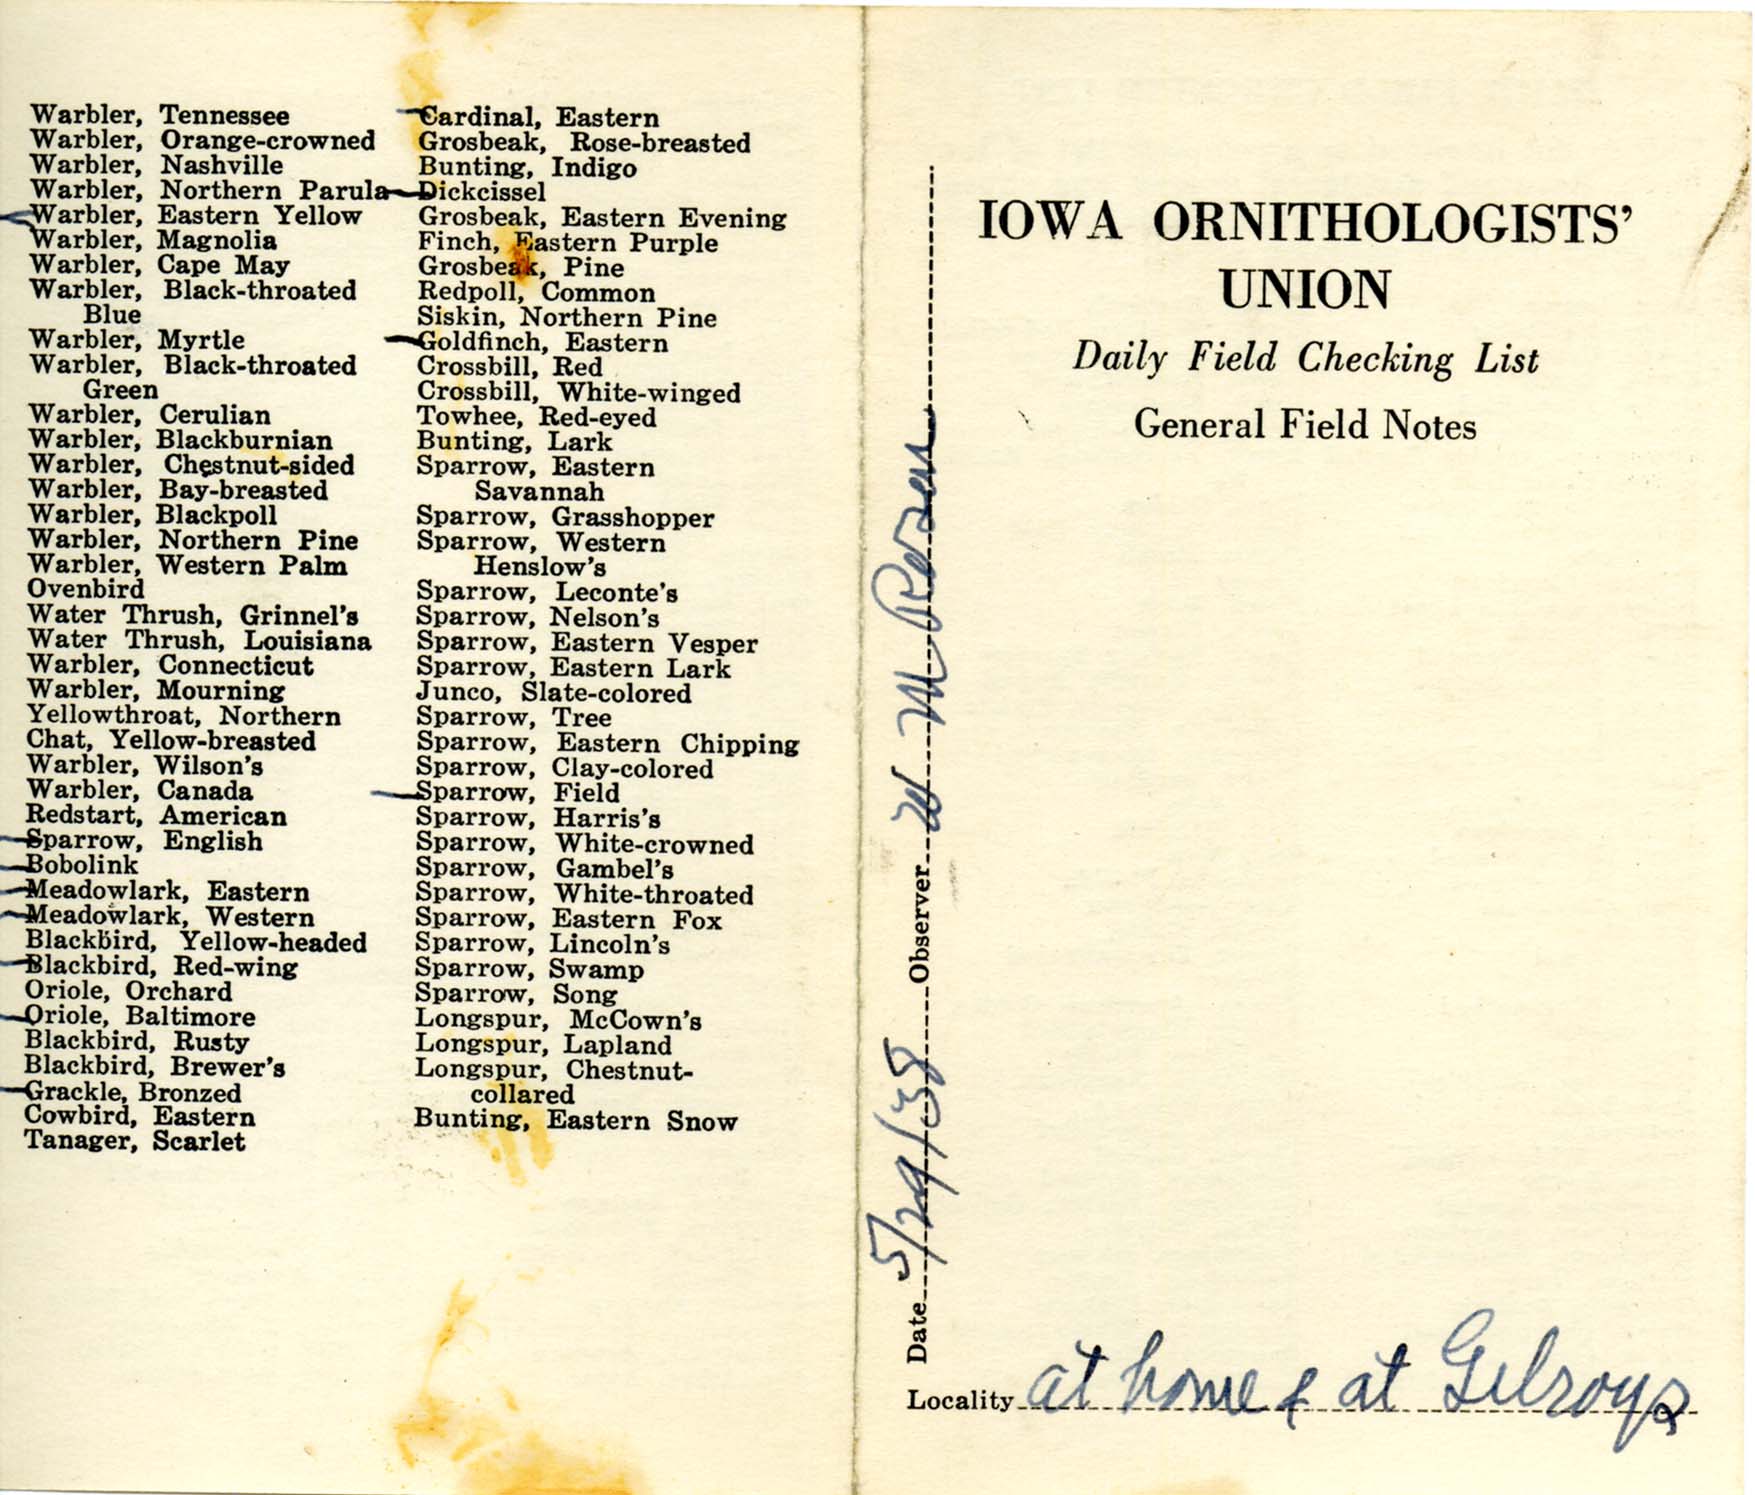 Daily field checking list by Walter Rosene, May 29, 1938